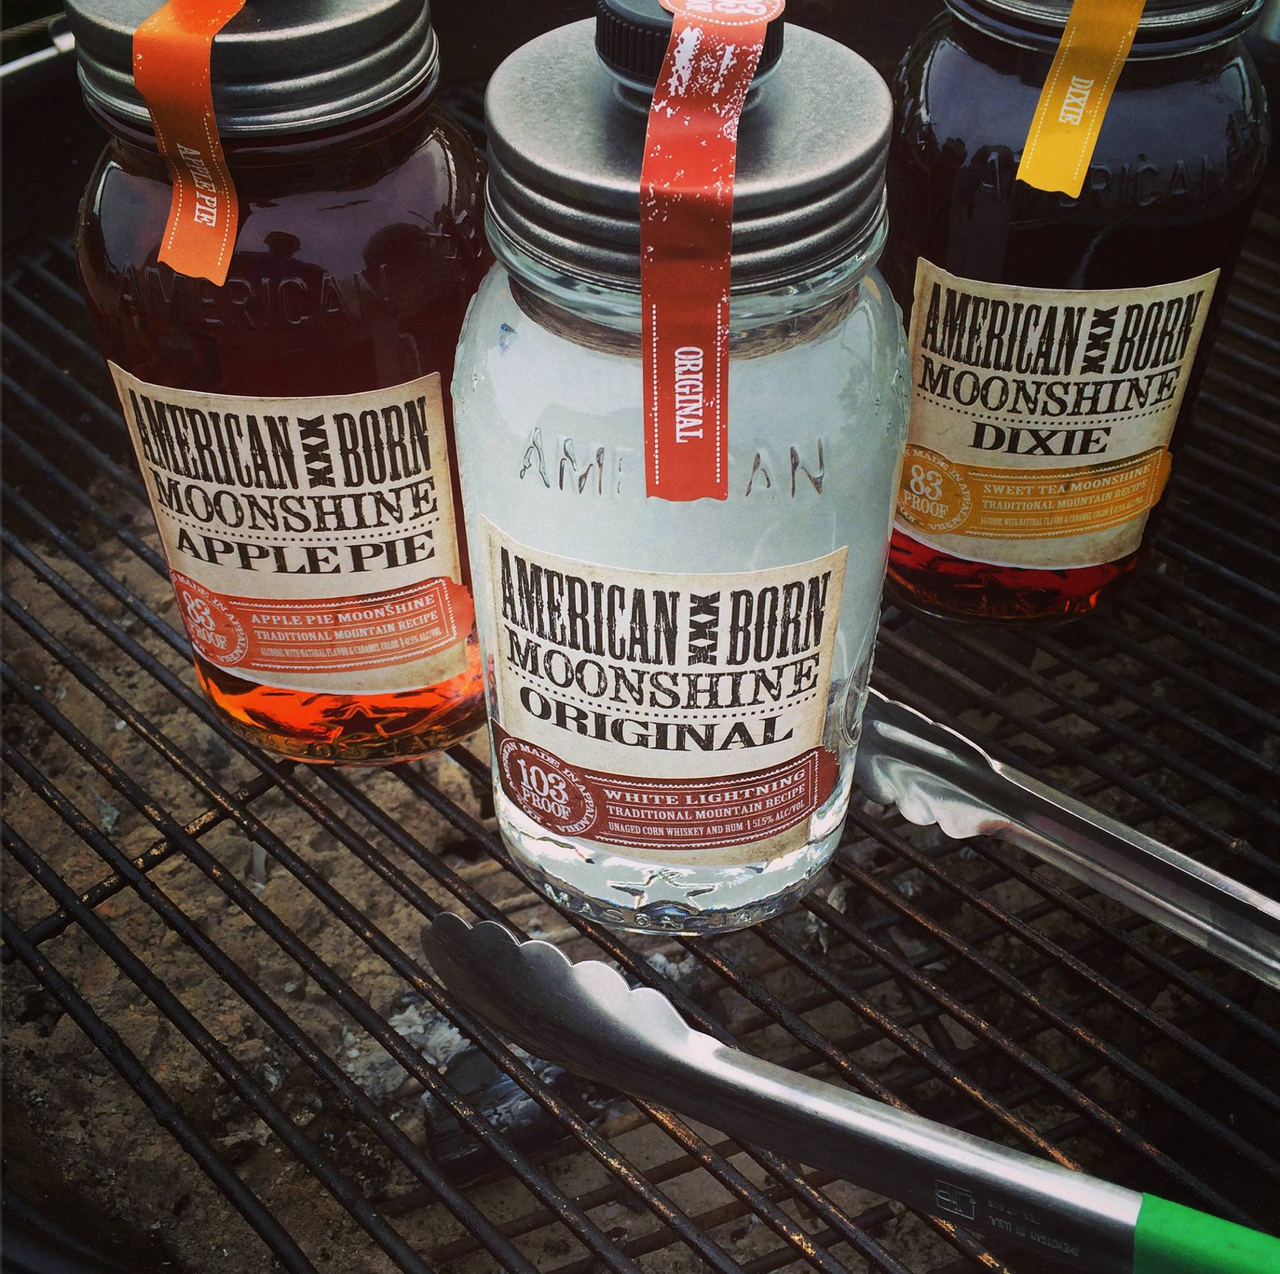 American Born Moonshine specializes in the basics